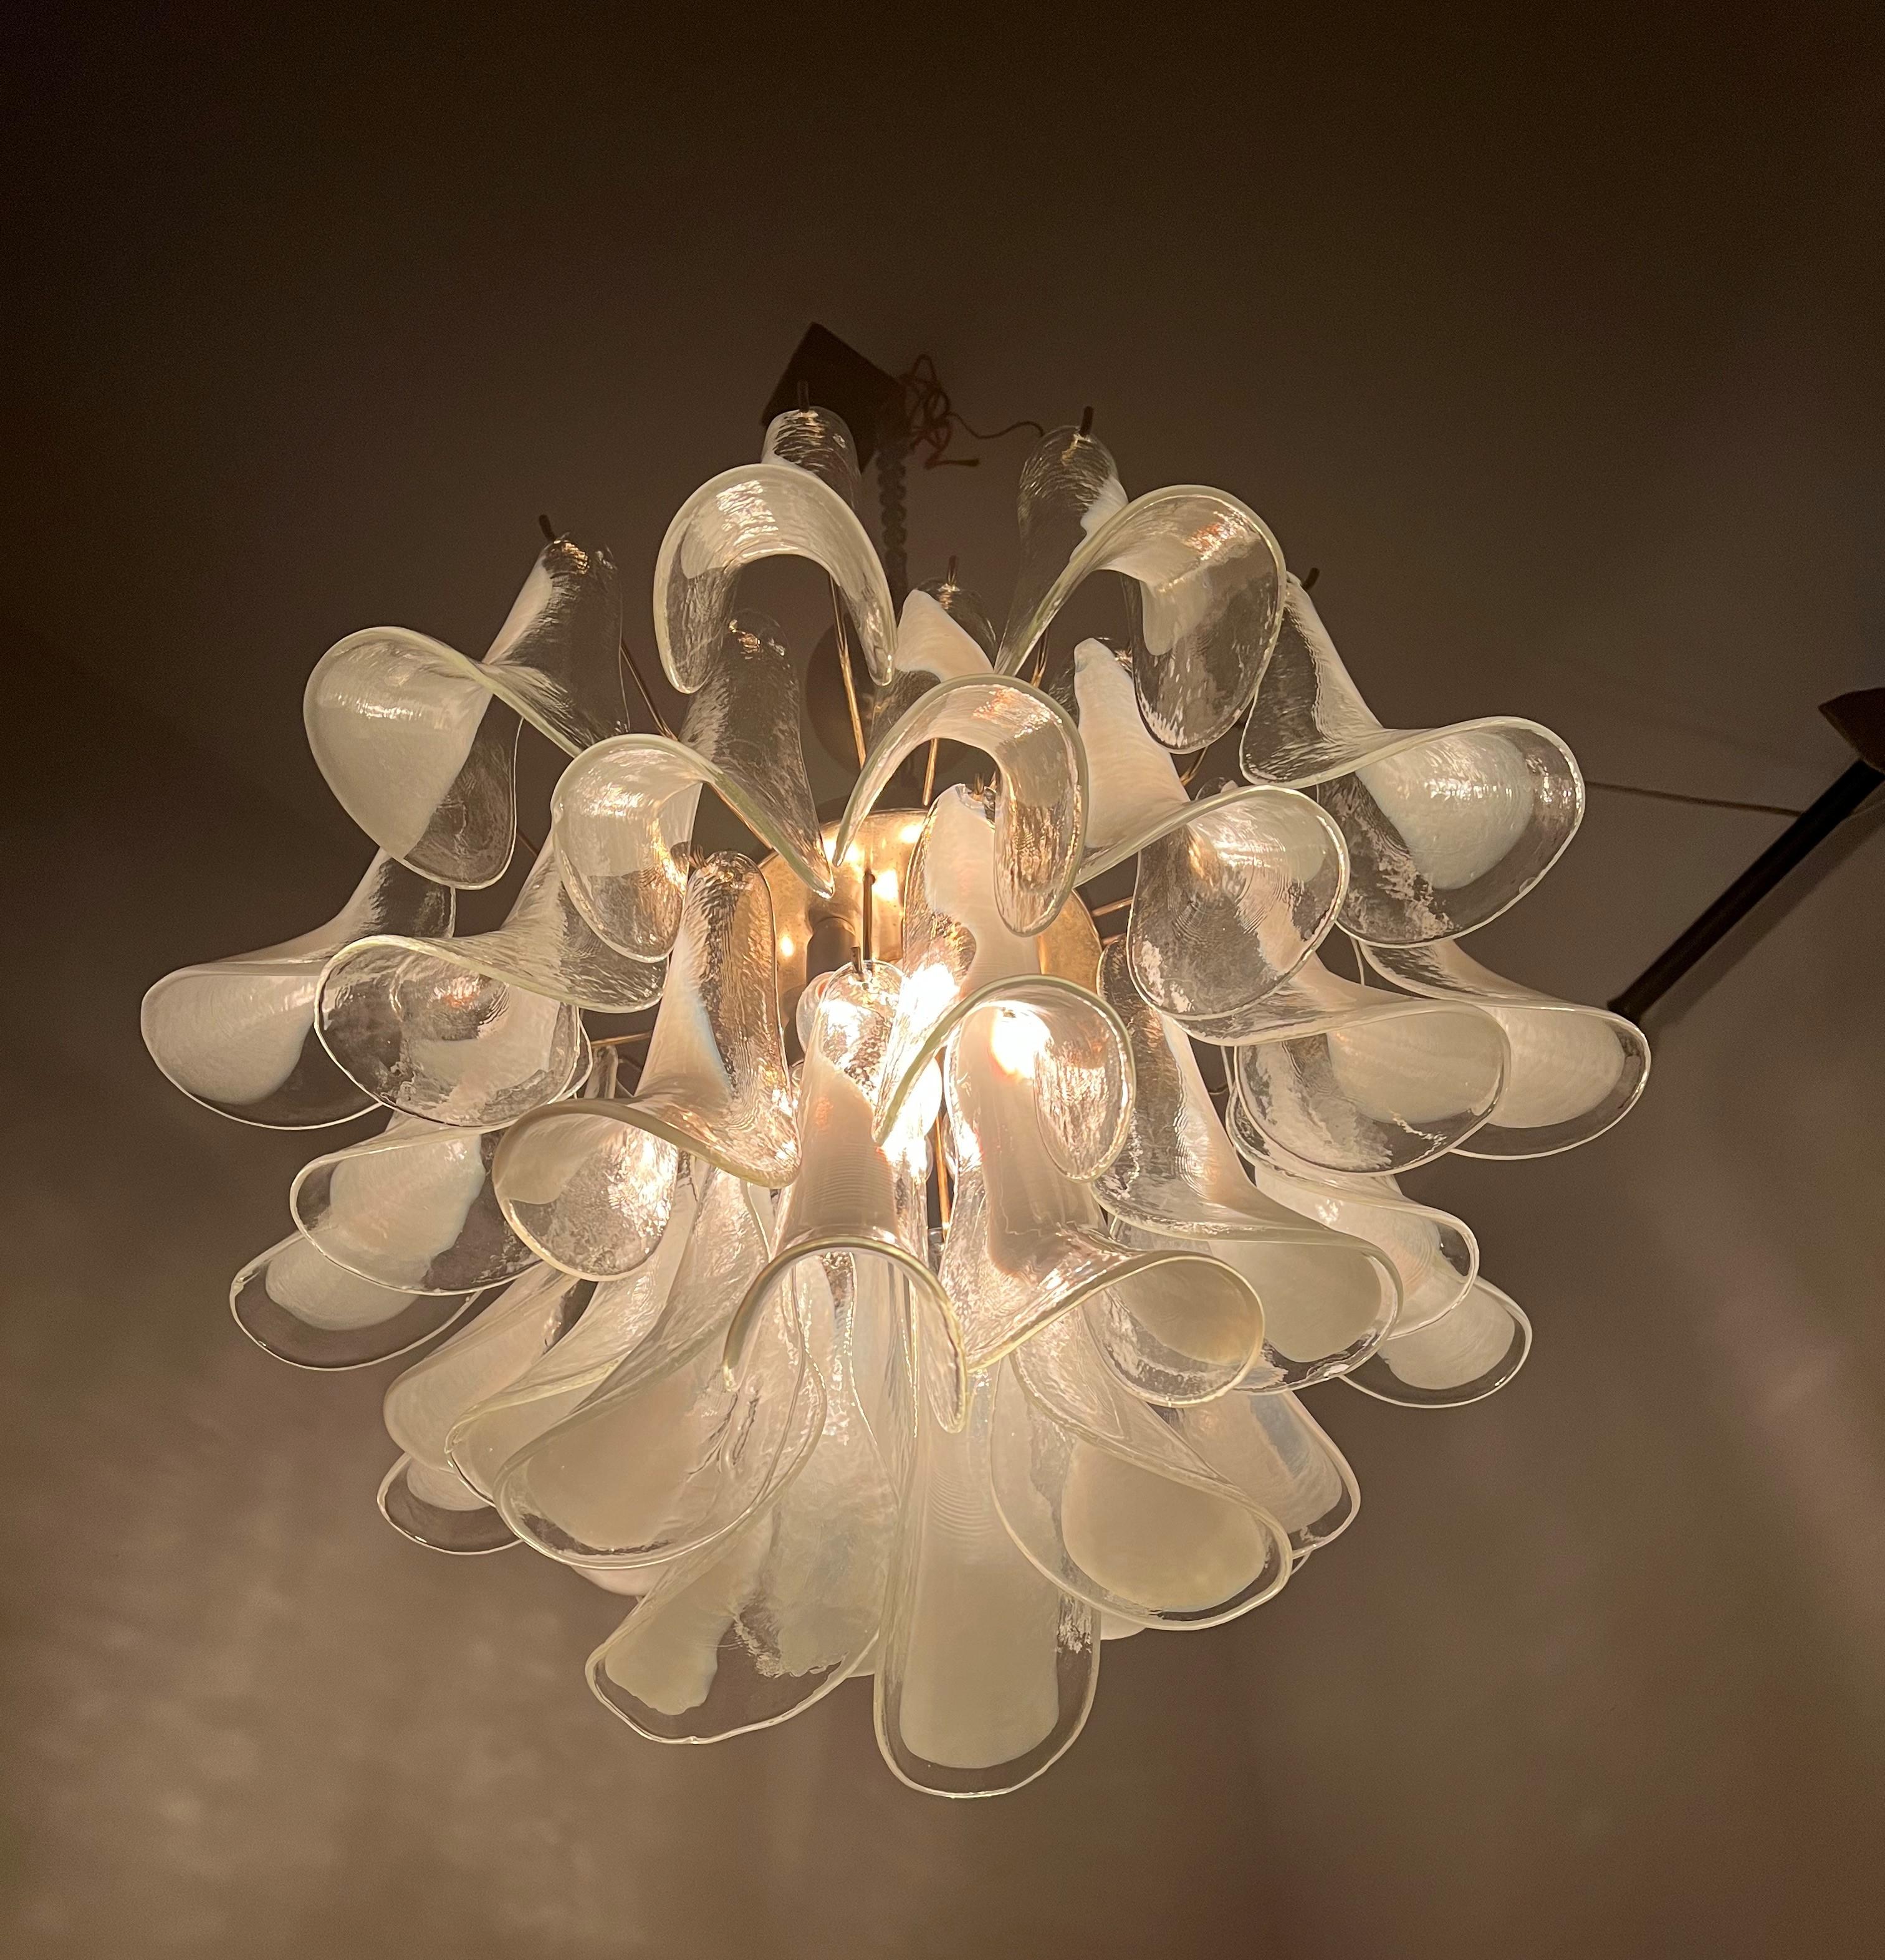 Two Identical Signed Mid-Century Modern Chandeliers, La Murrina in Murano Glass For Sale 13